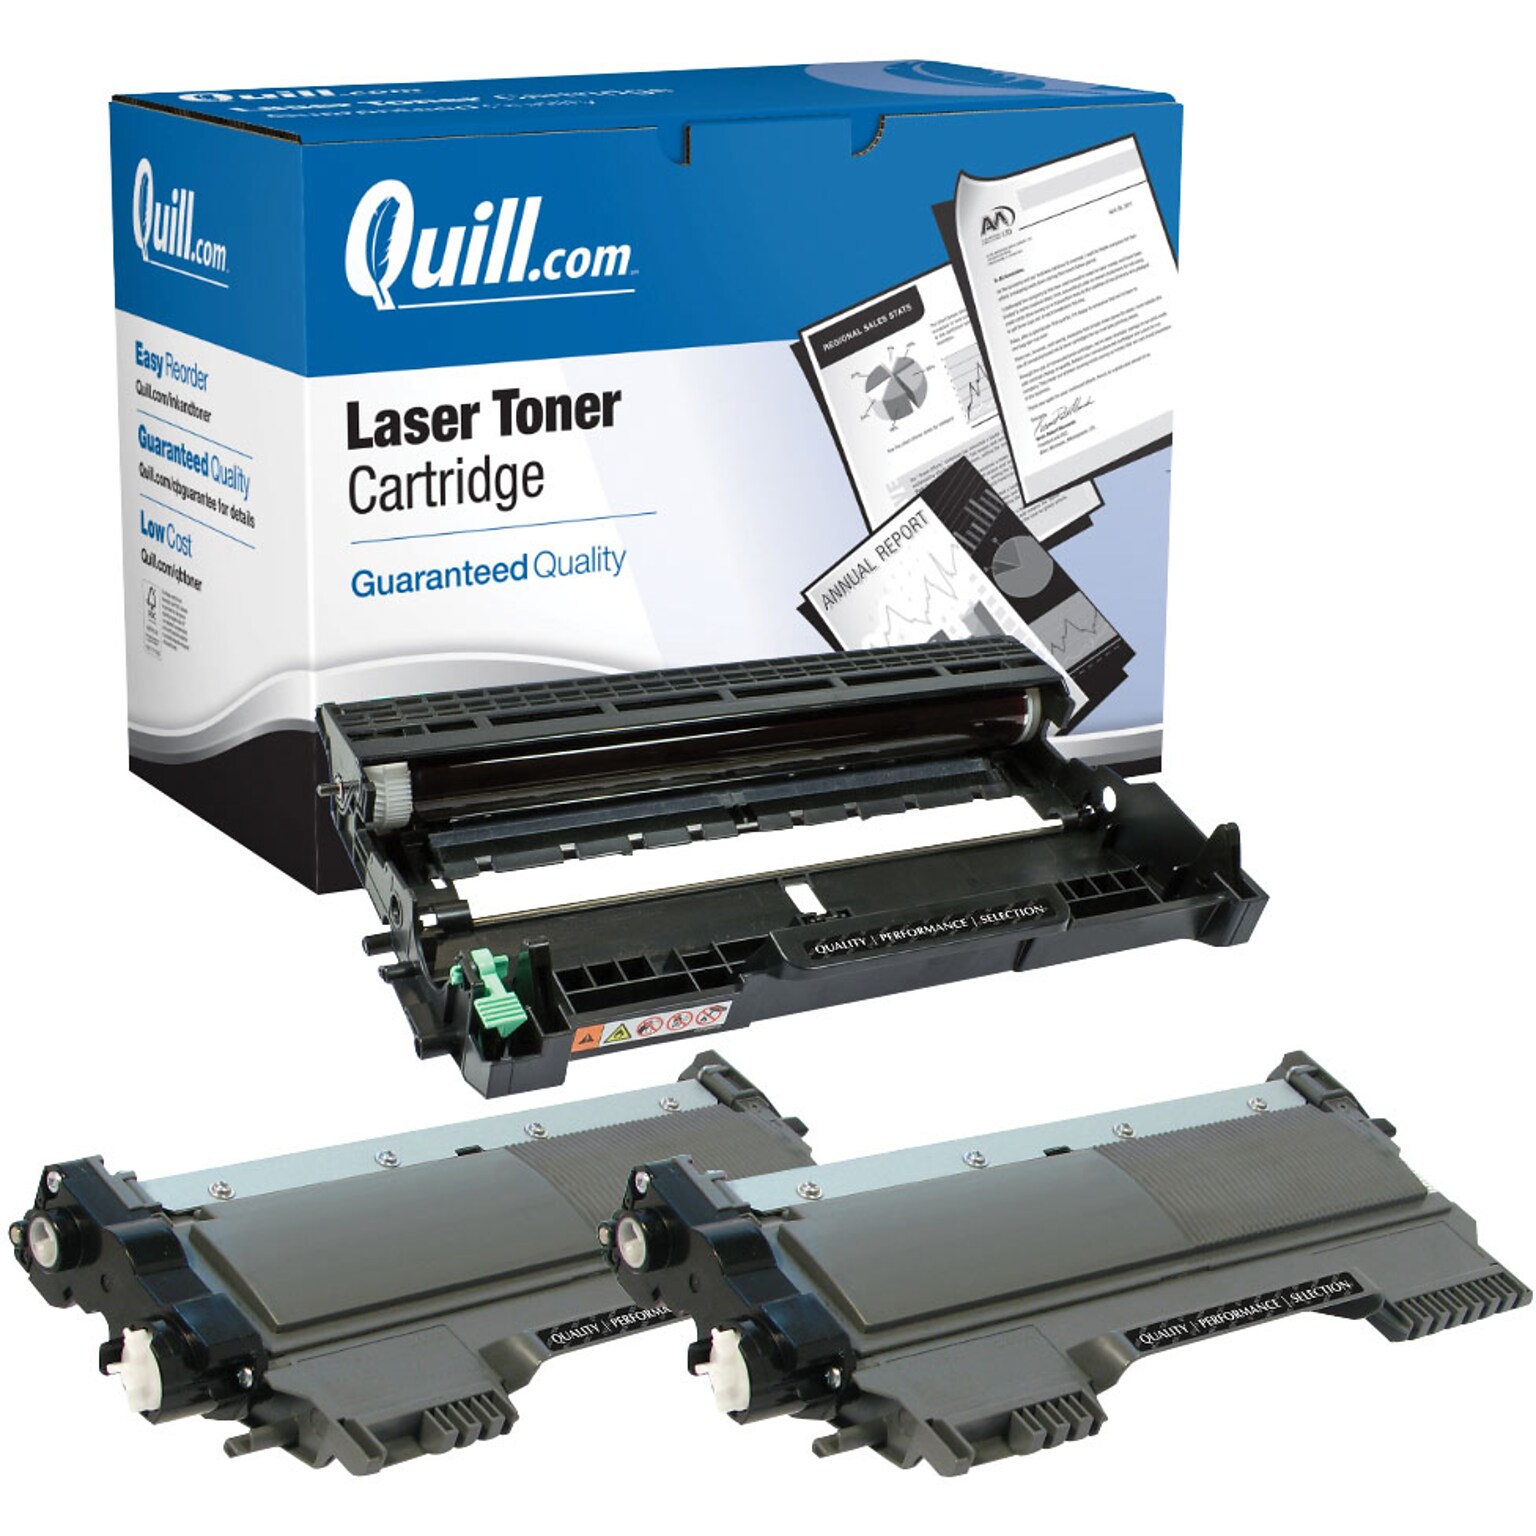 Quill Brand® Remanufactured Black HY Laser Toner Cartridge/Black Standard Yield Drum Replacement for Brother TN450 and DR420